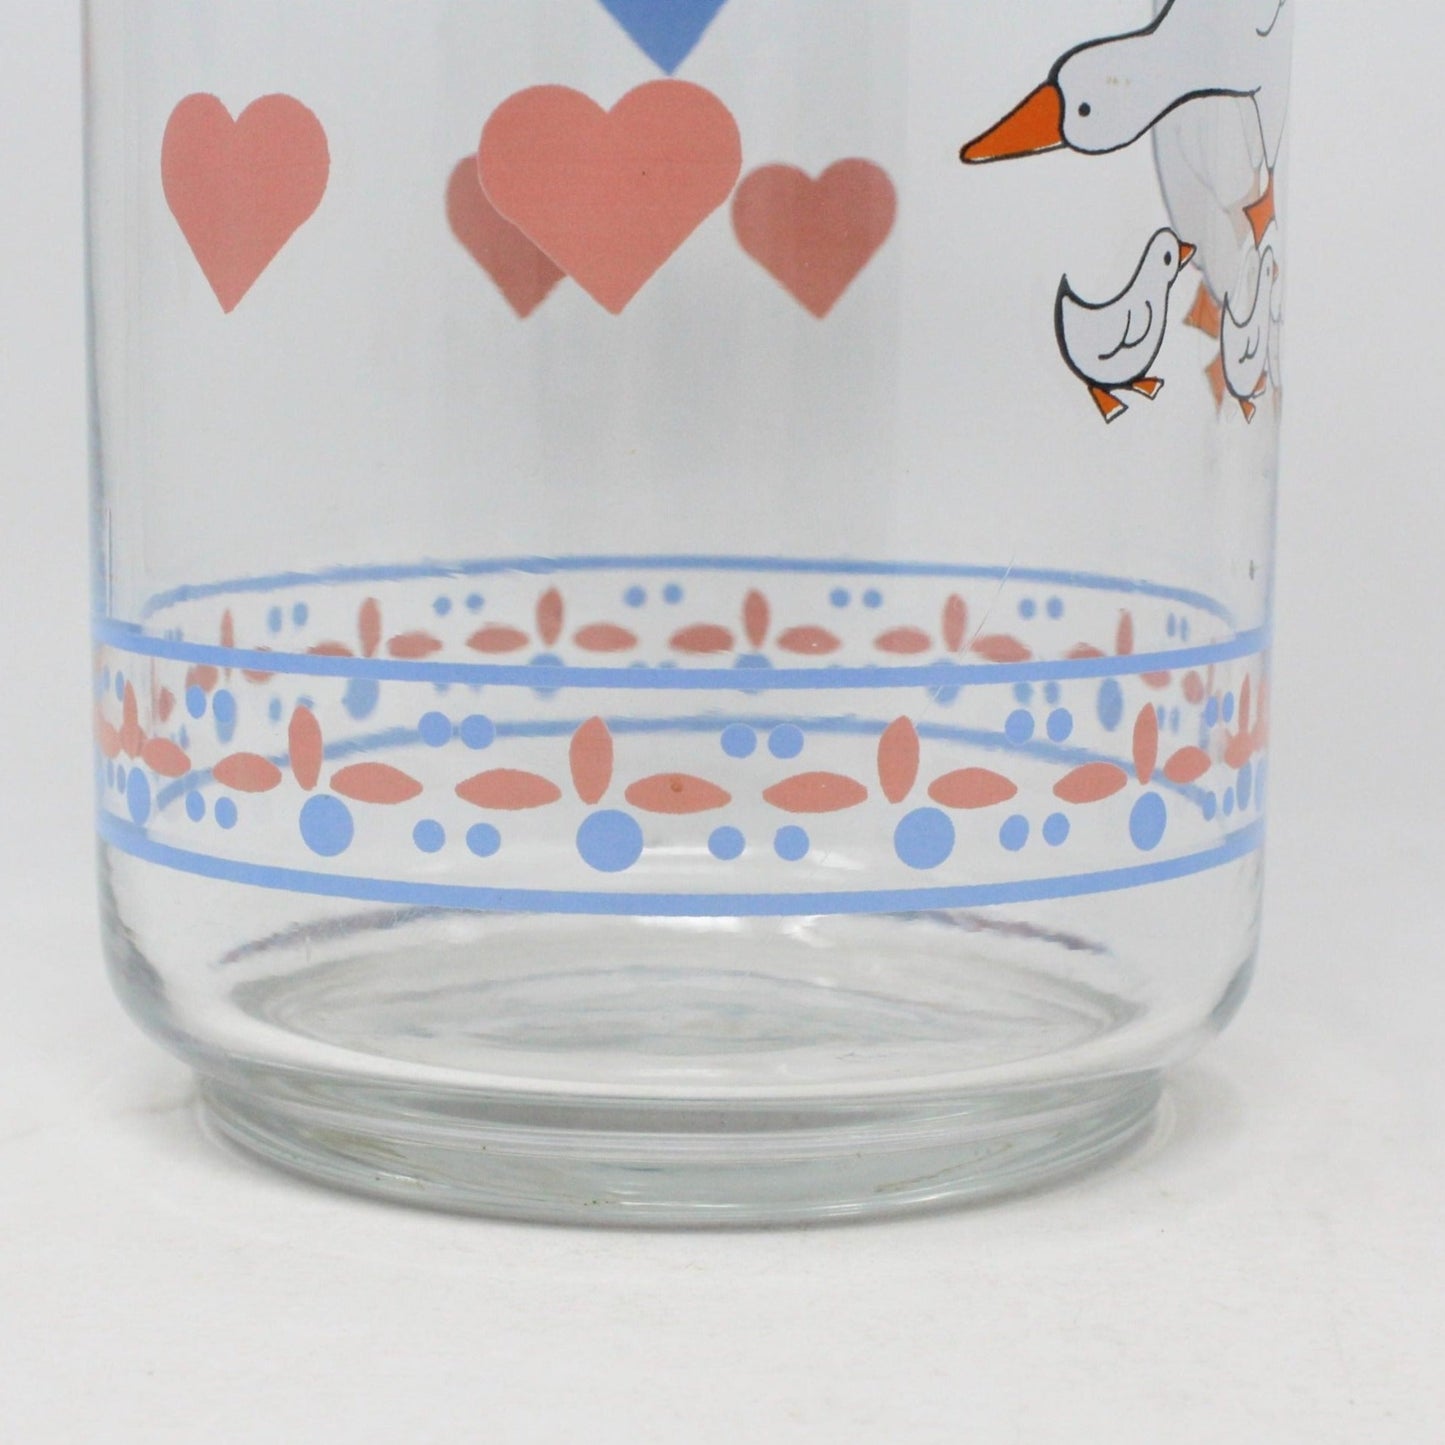 Storage Canister, Luminarc, Apothecary Jar, Hearts & Geese, France, Vintage